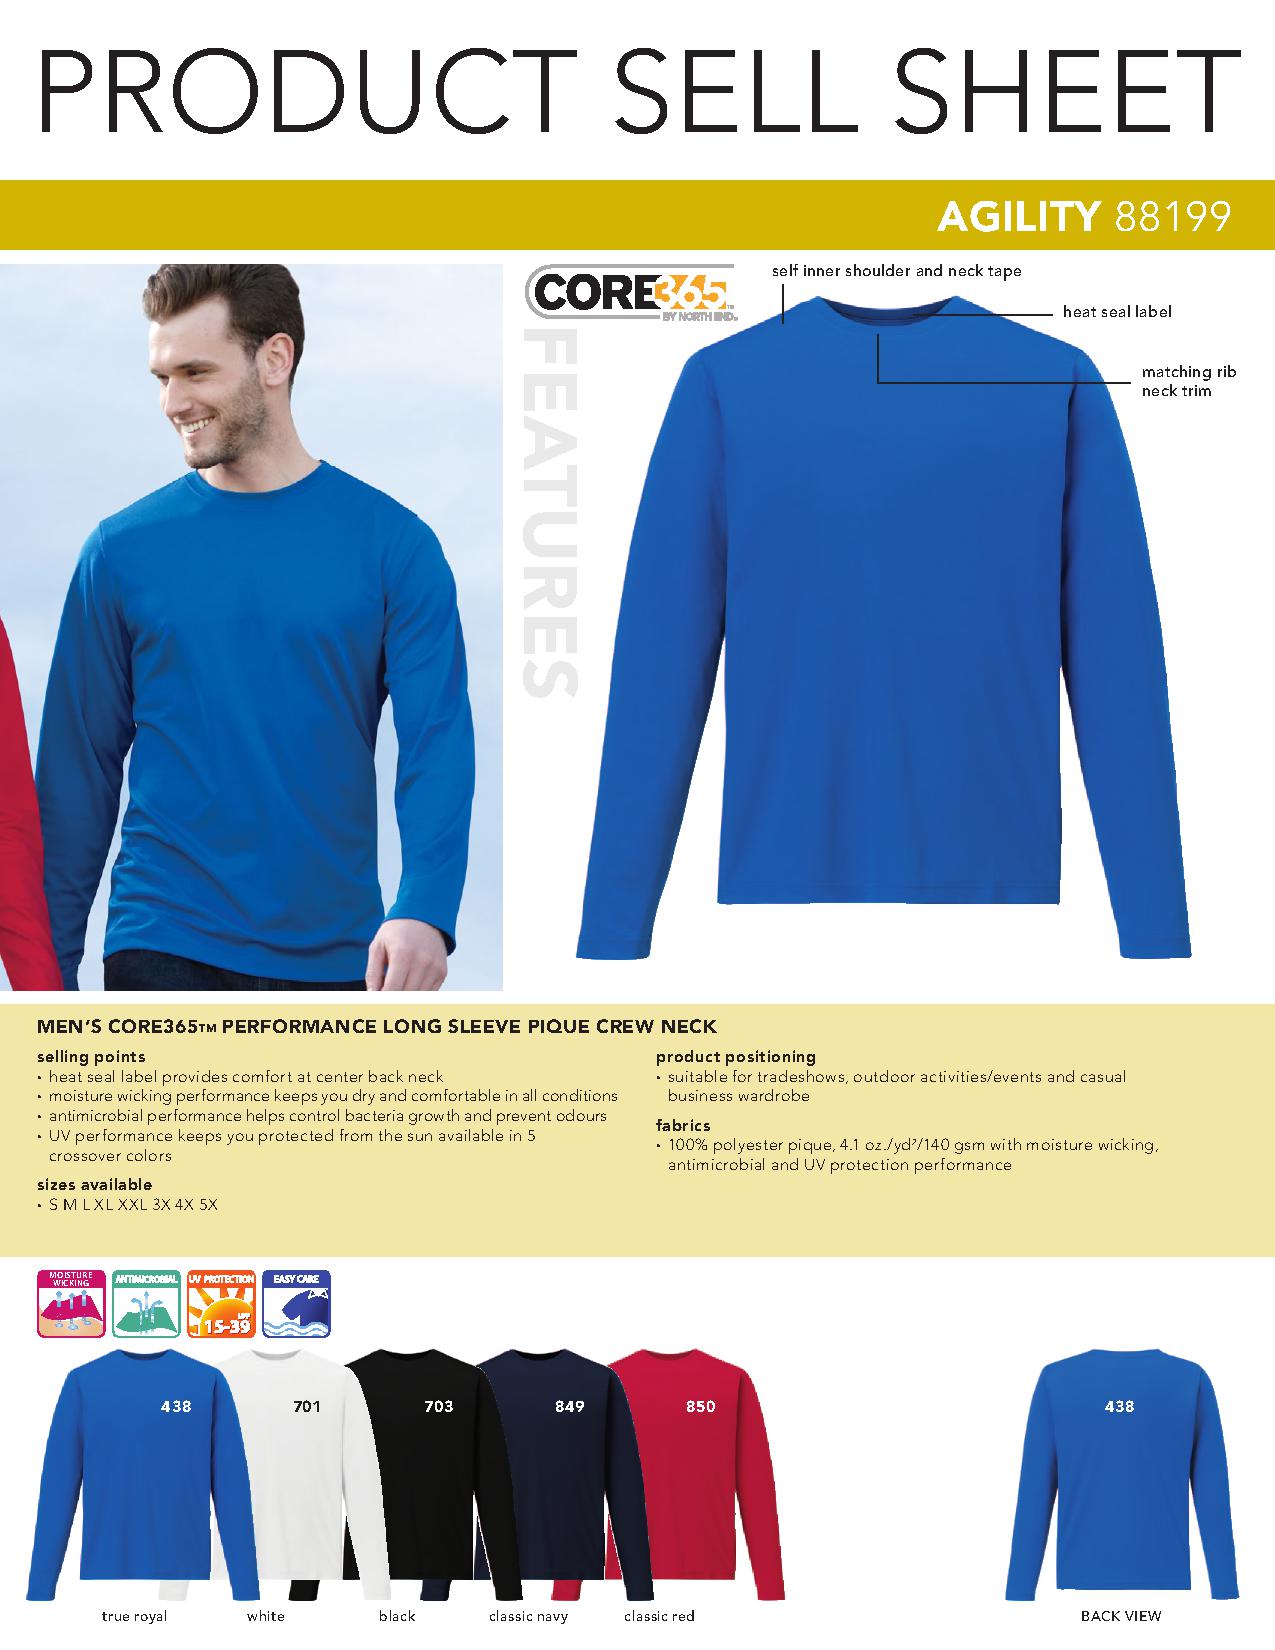 Ash City Twill 88199 - Agility Outwear Men's Performance Lone Sleeve Pique Polo Crew Neck